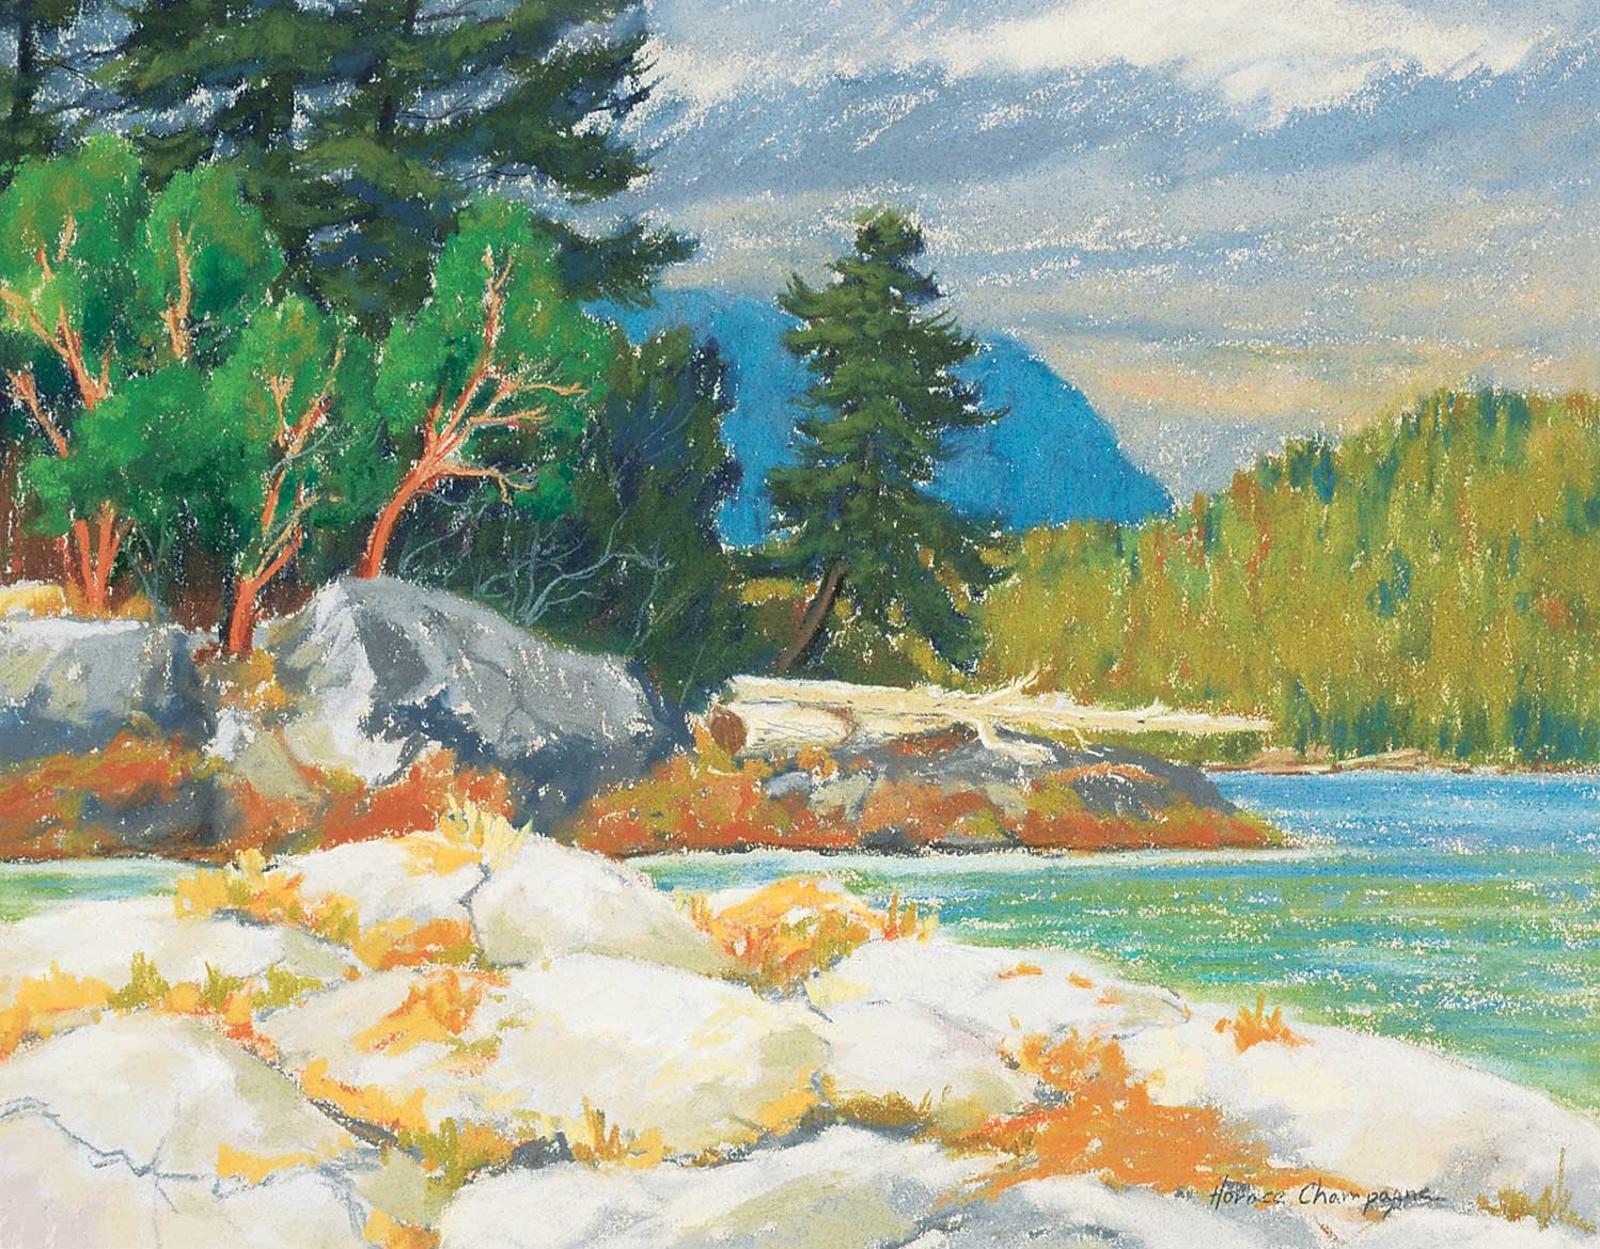 Horace Champagne (1937) - Return to Paradise Island, Gibsons British Columbia